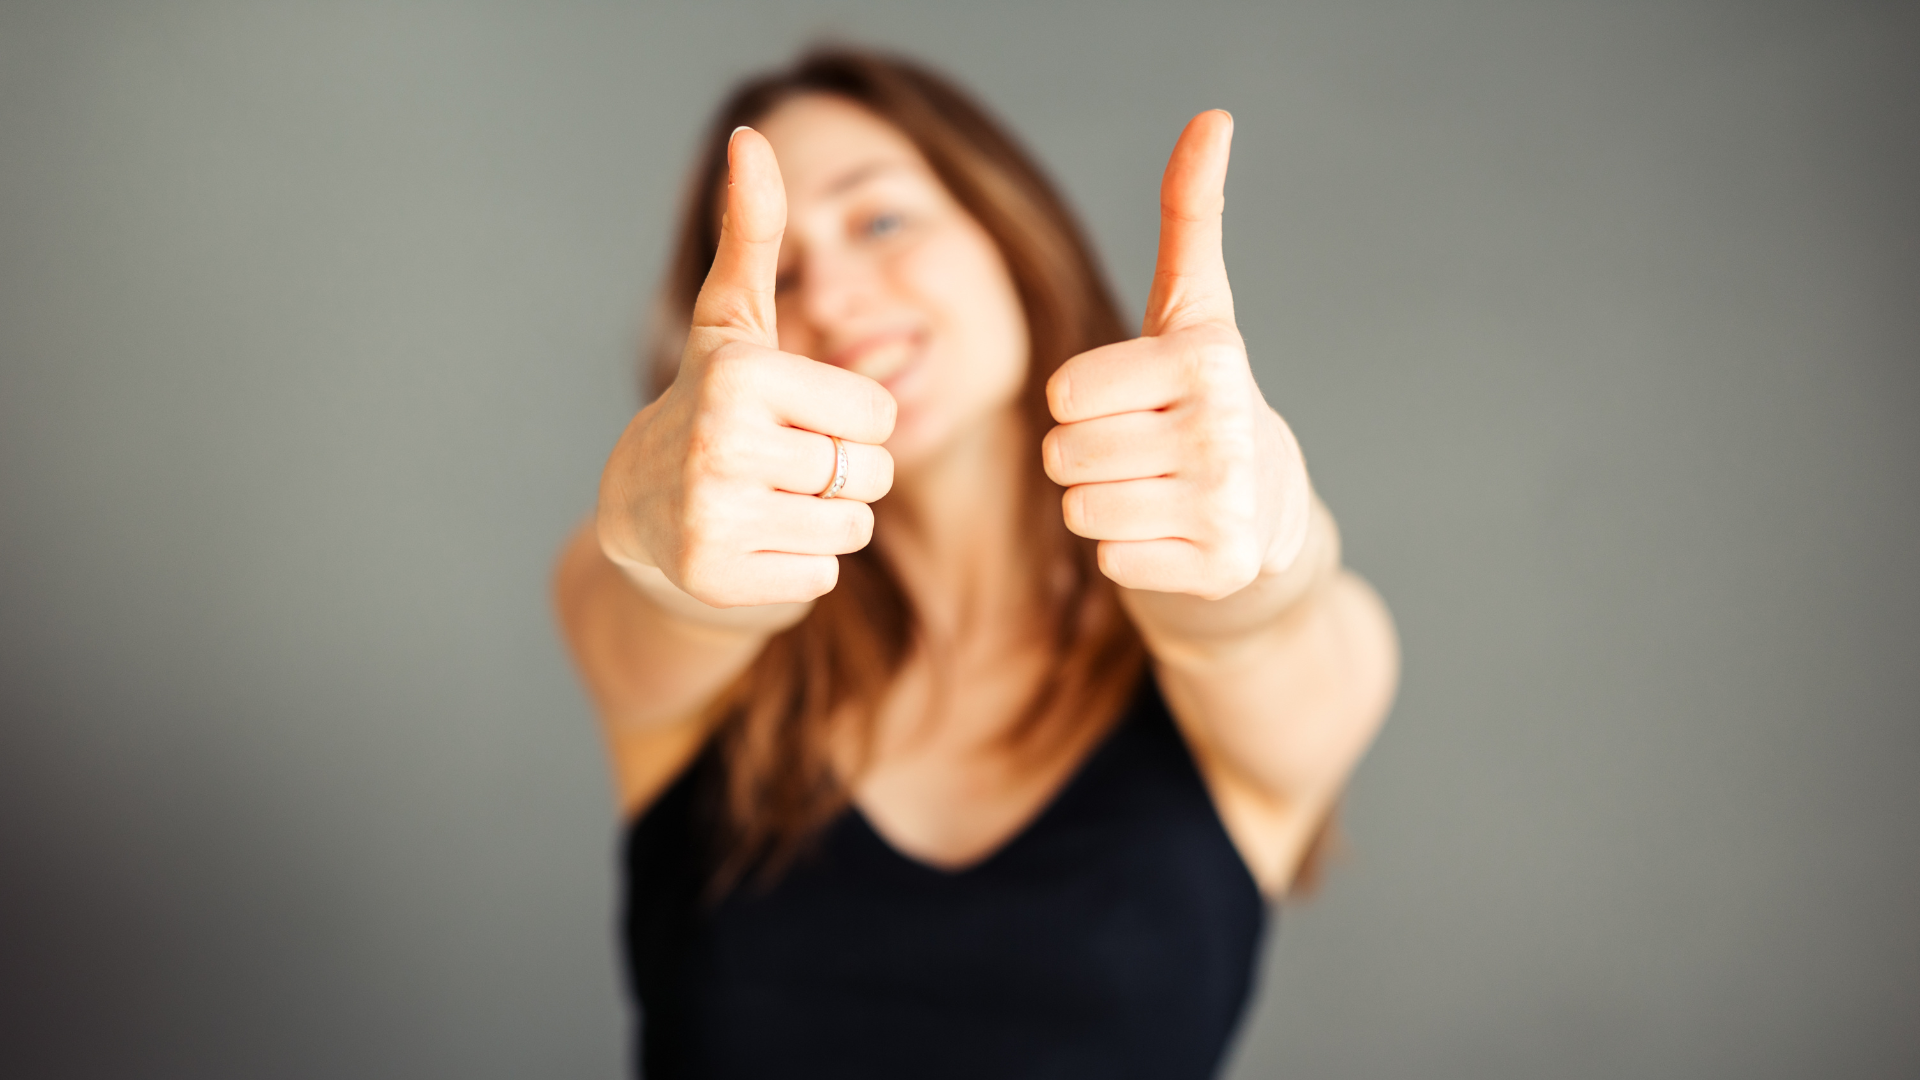 young girl in a black tank top holding her thumbs up smiling